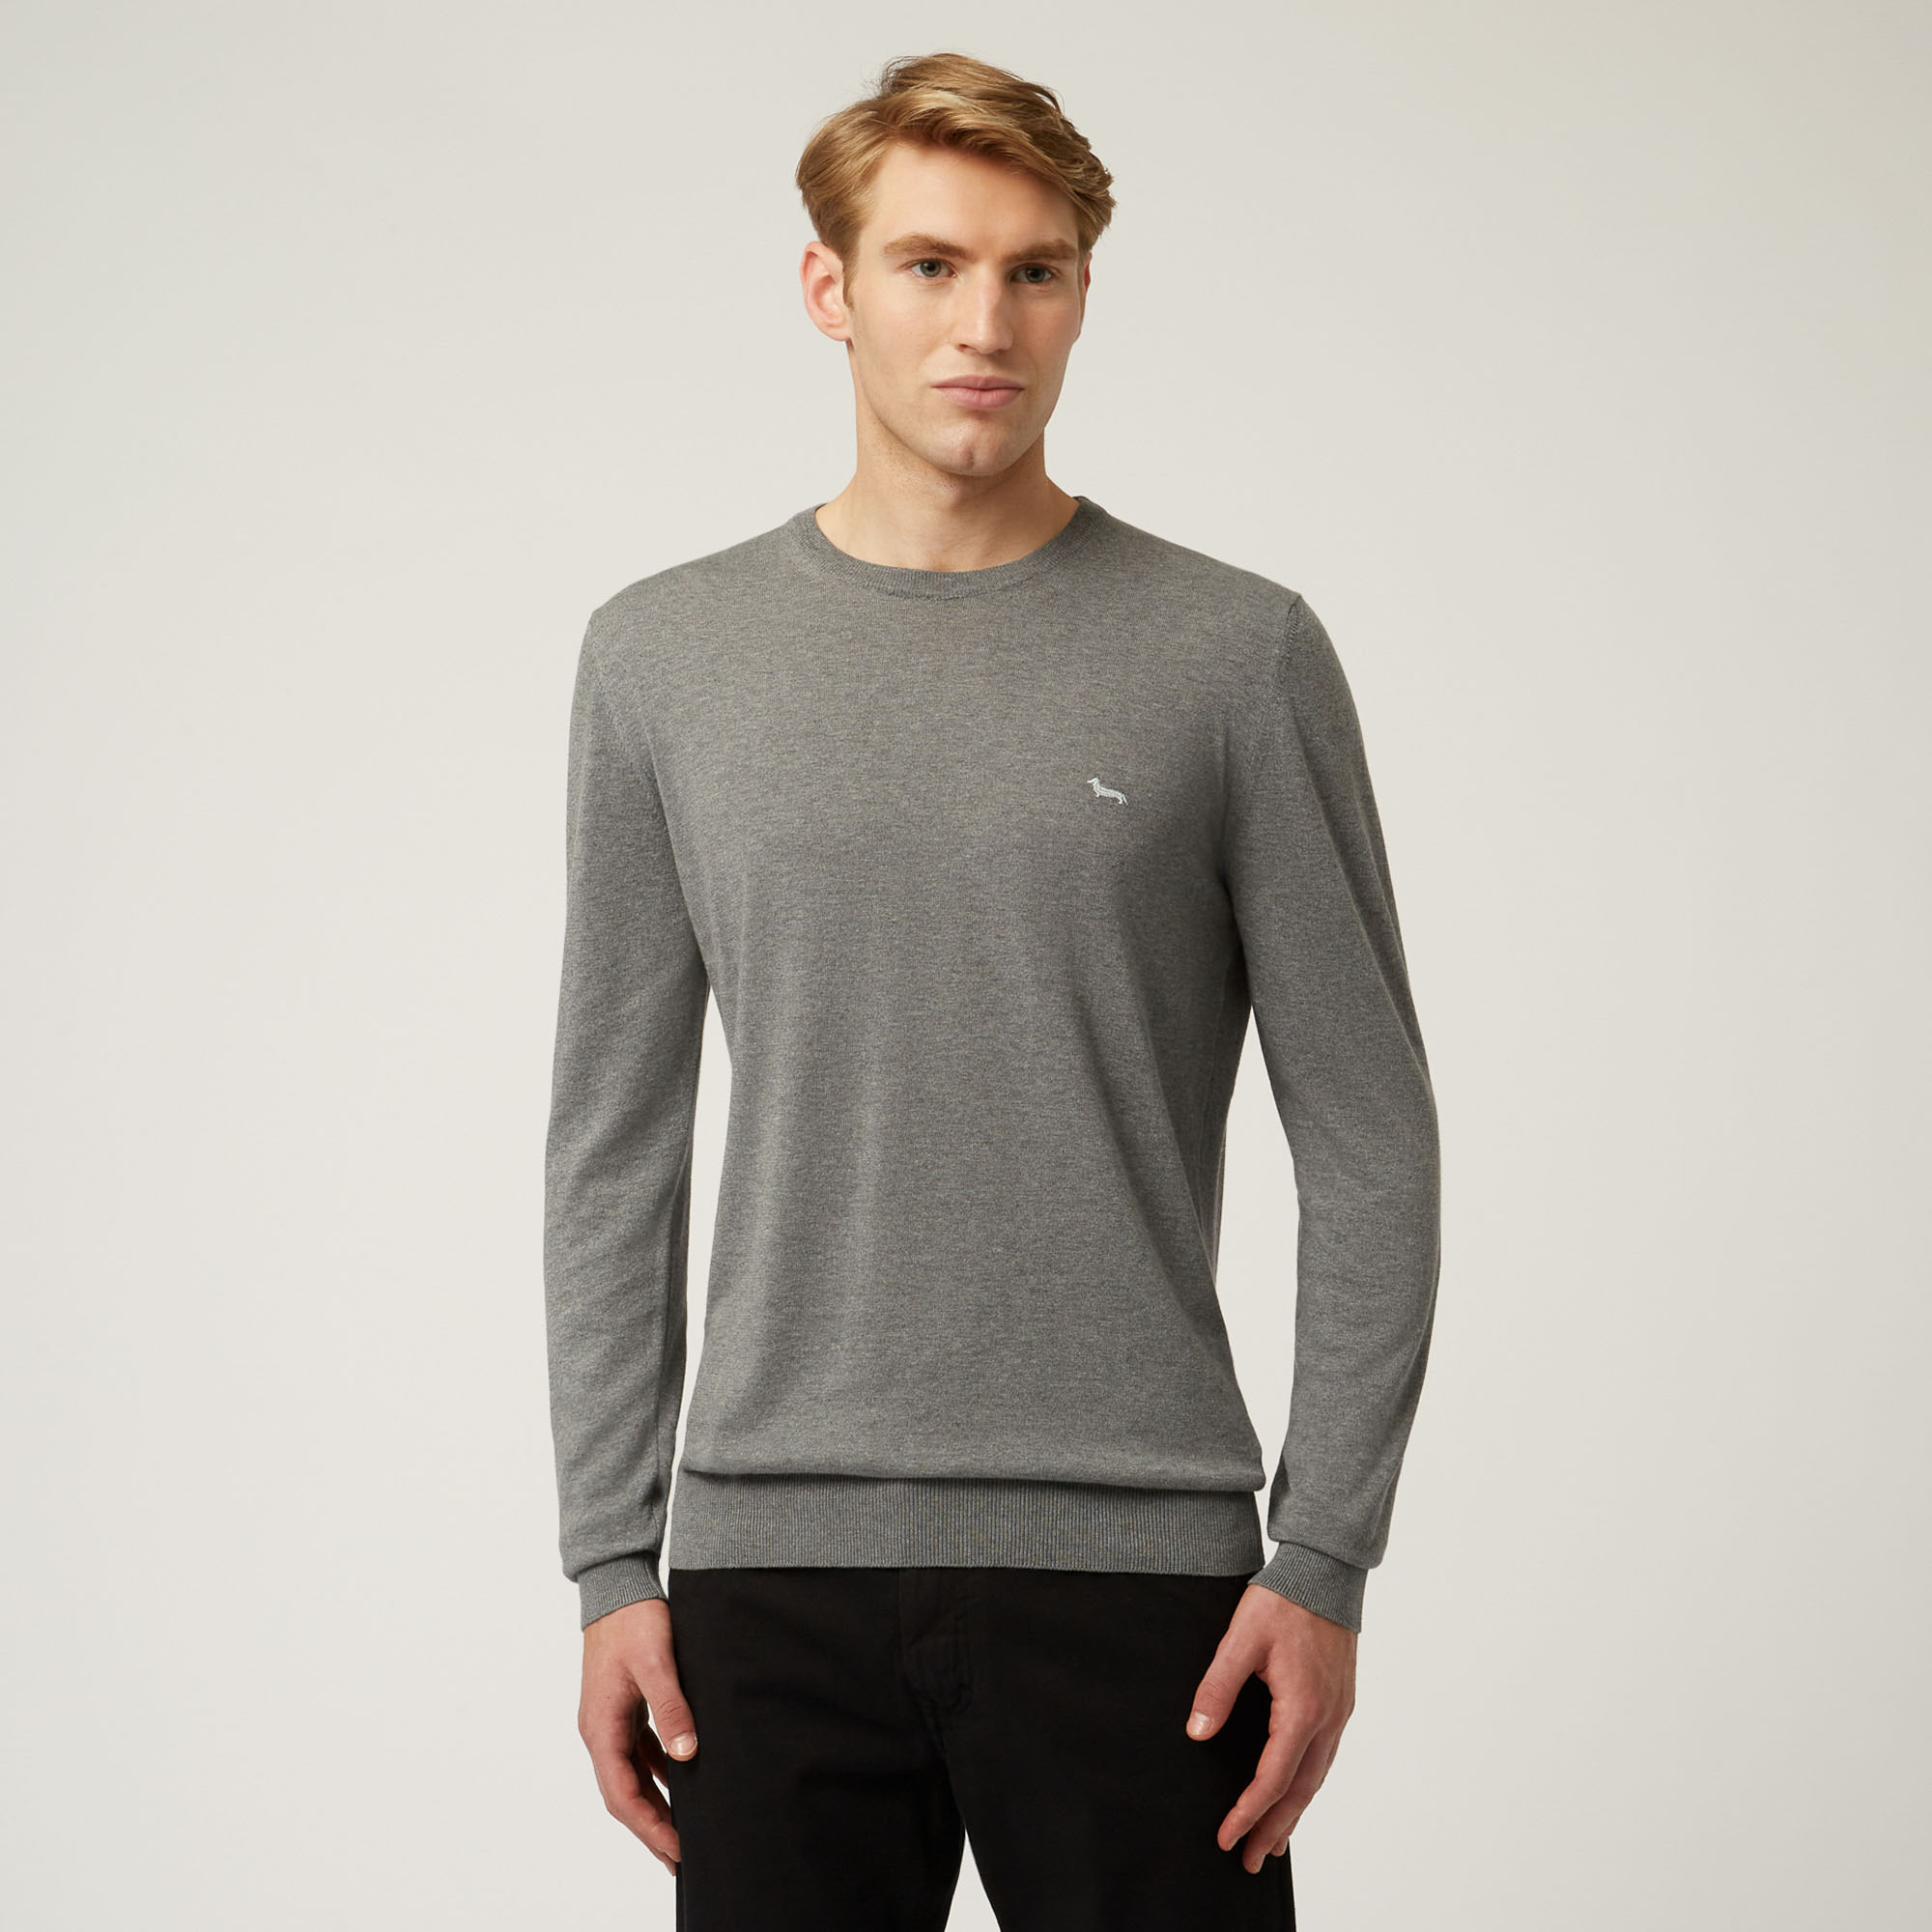 Essentials cotton and cashmere sweater, Grey, large